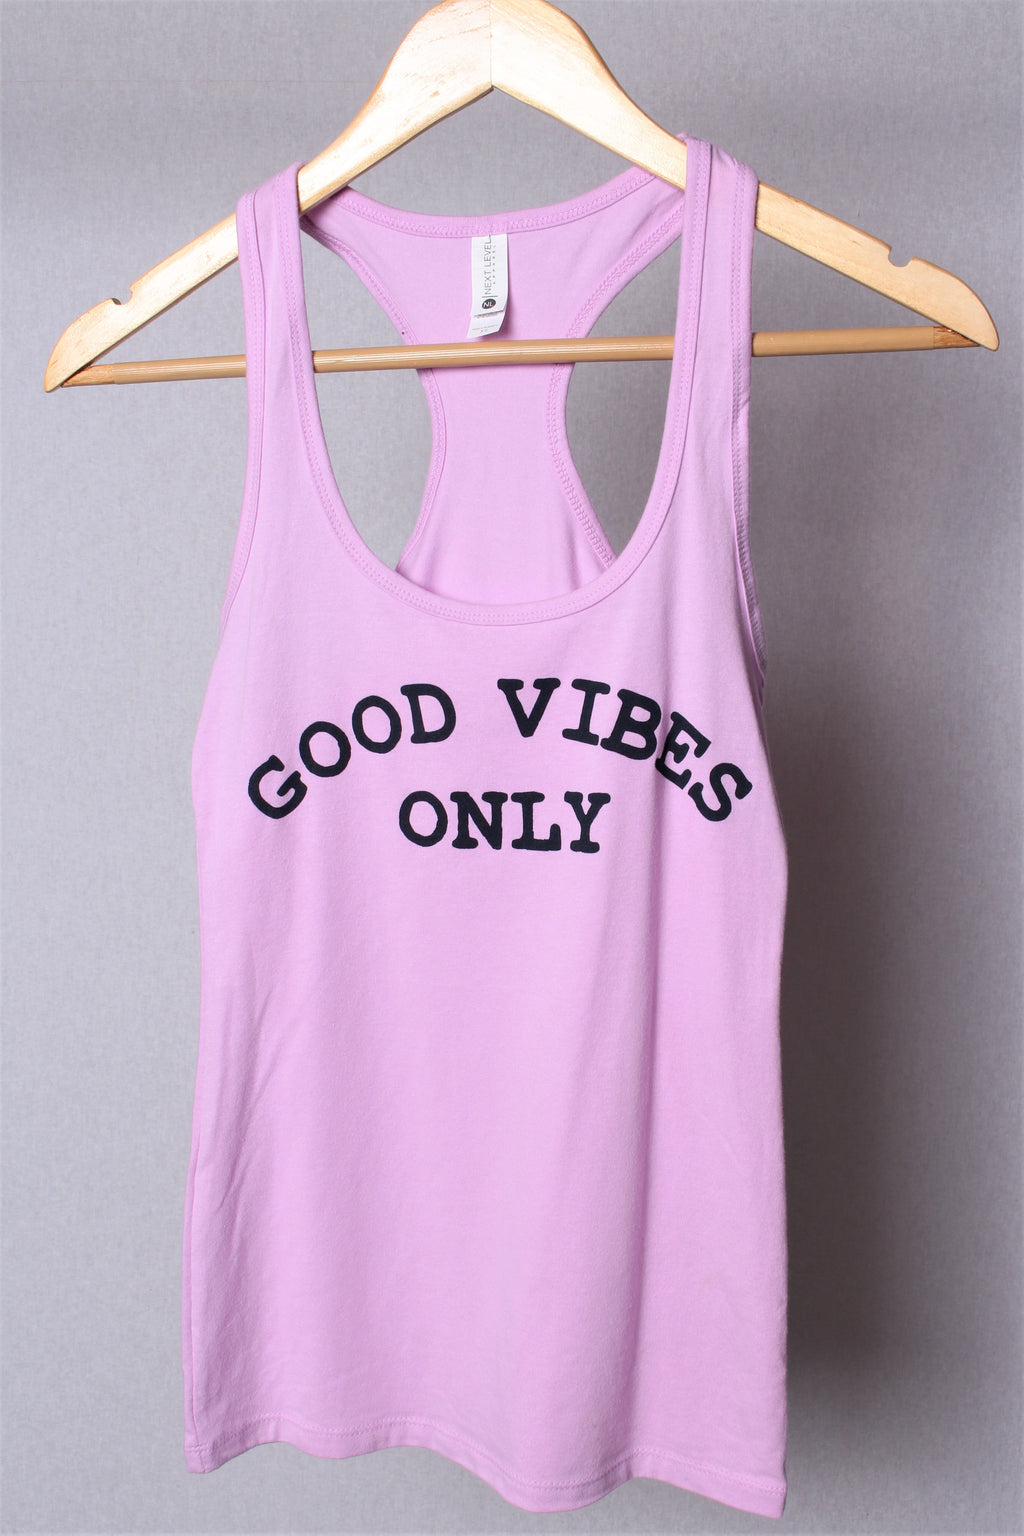 Women's Racerback Tank Top with "Good Vibes Only" Print